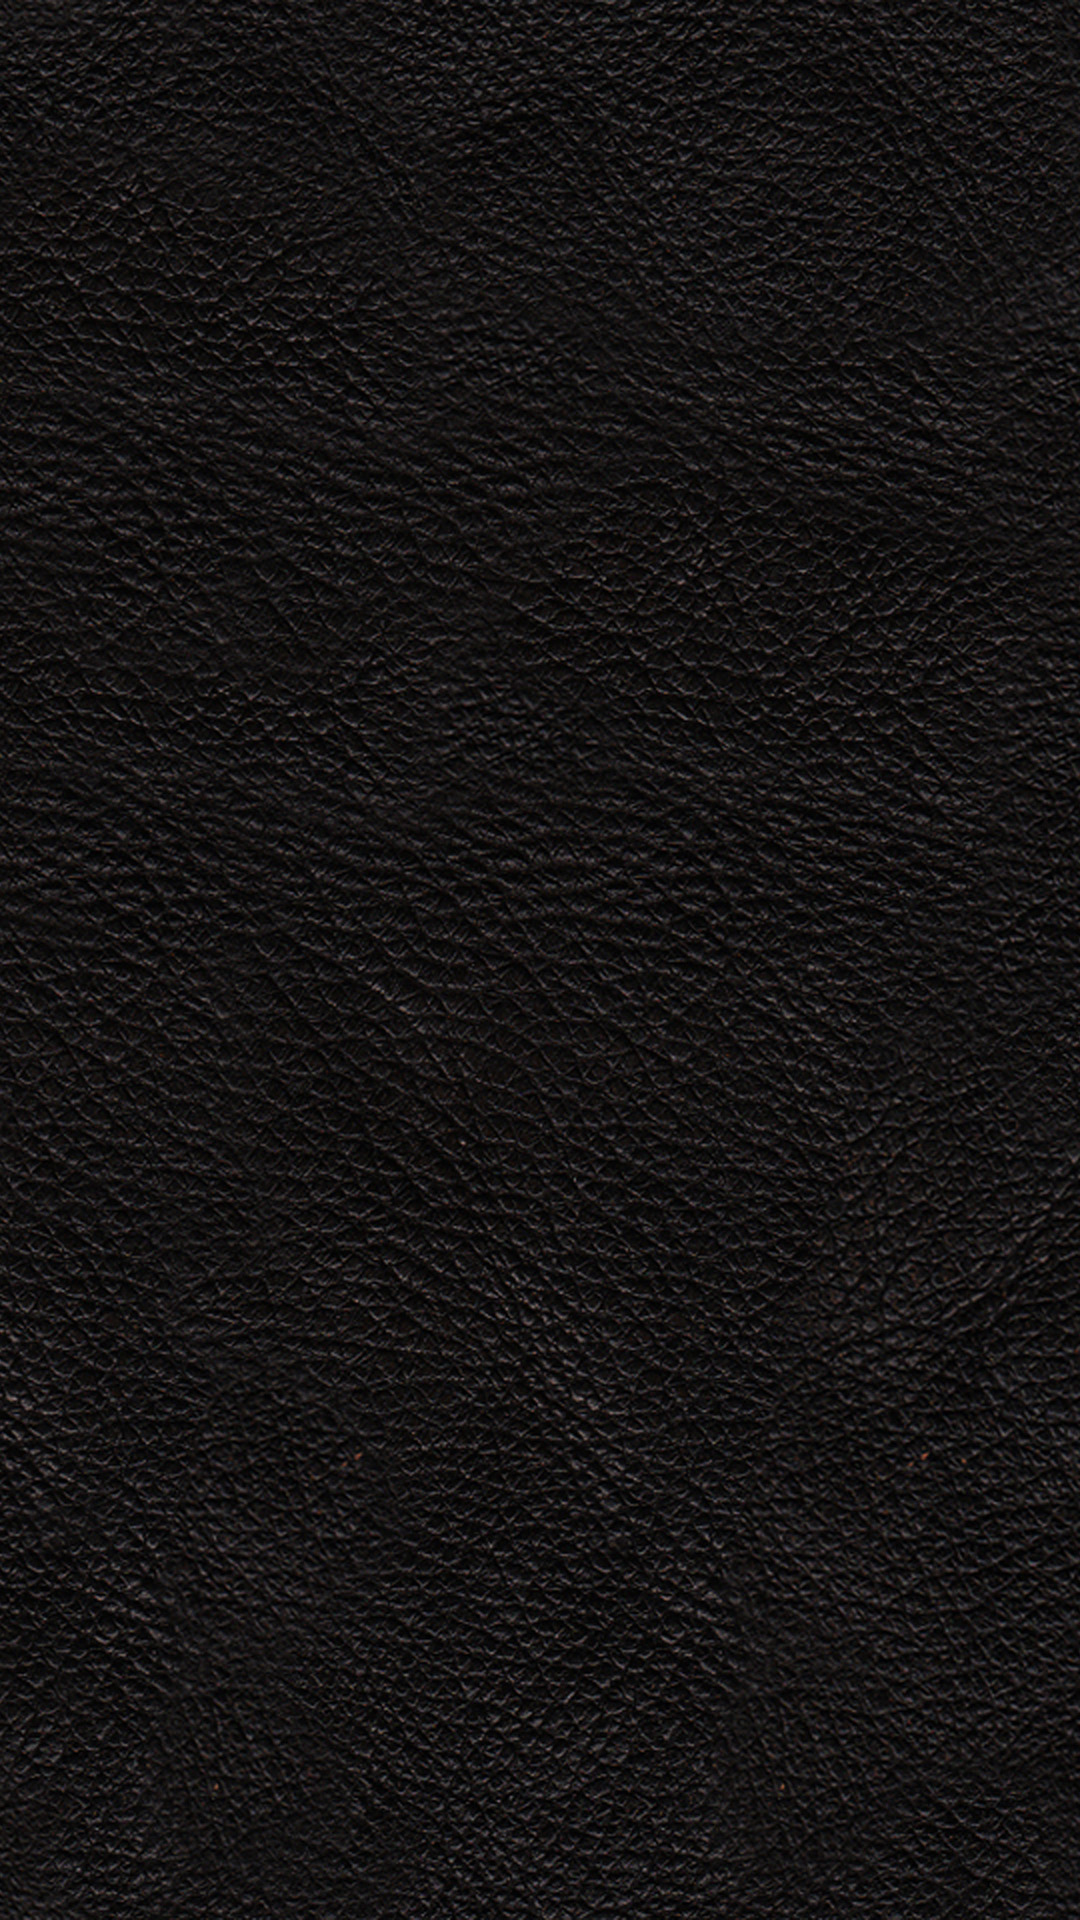 Black leather Wallpapers for Galaxy S5